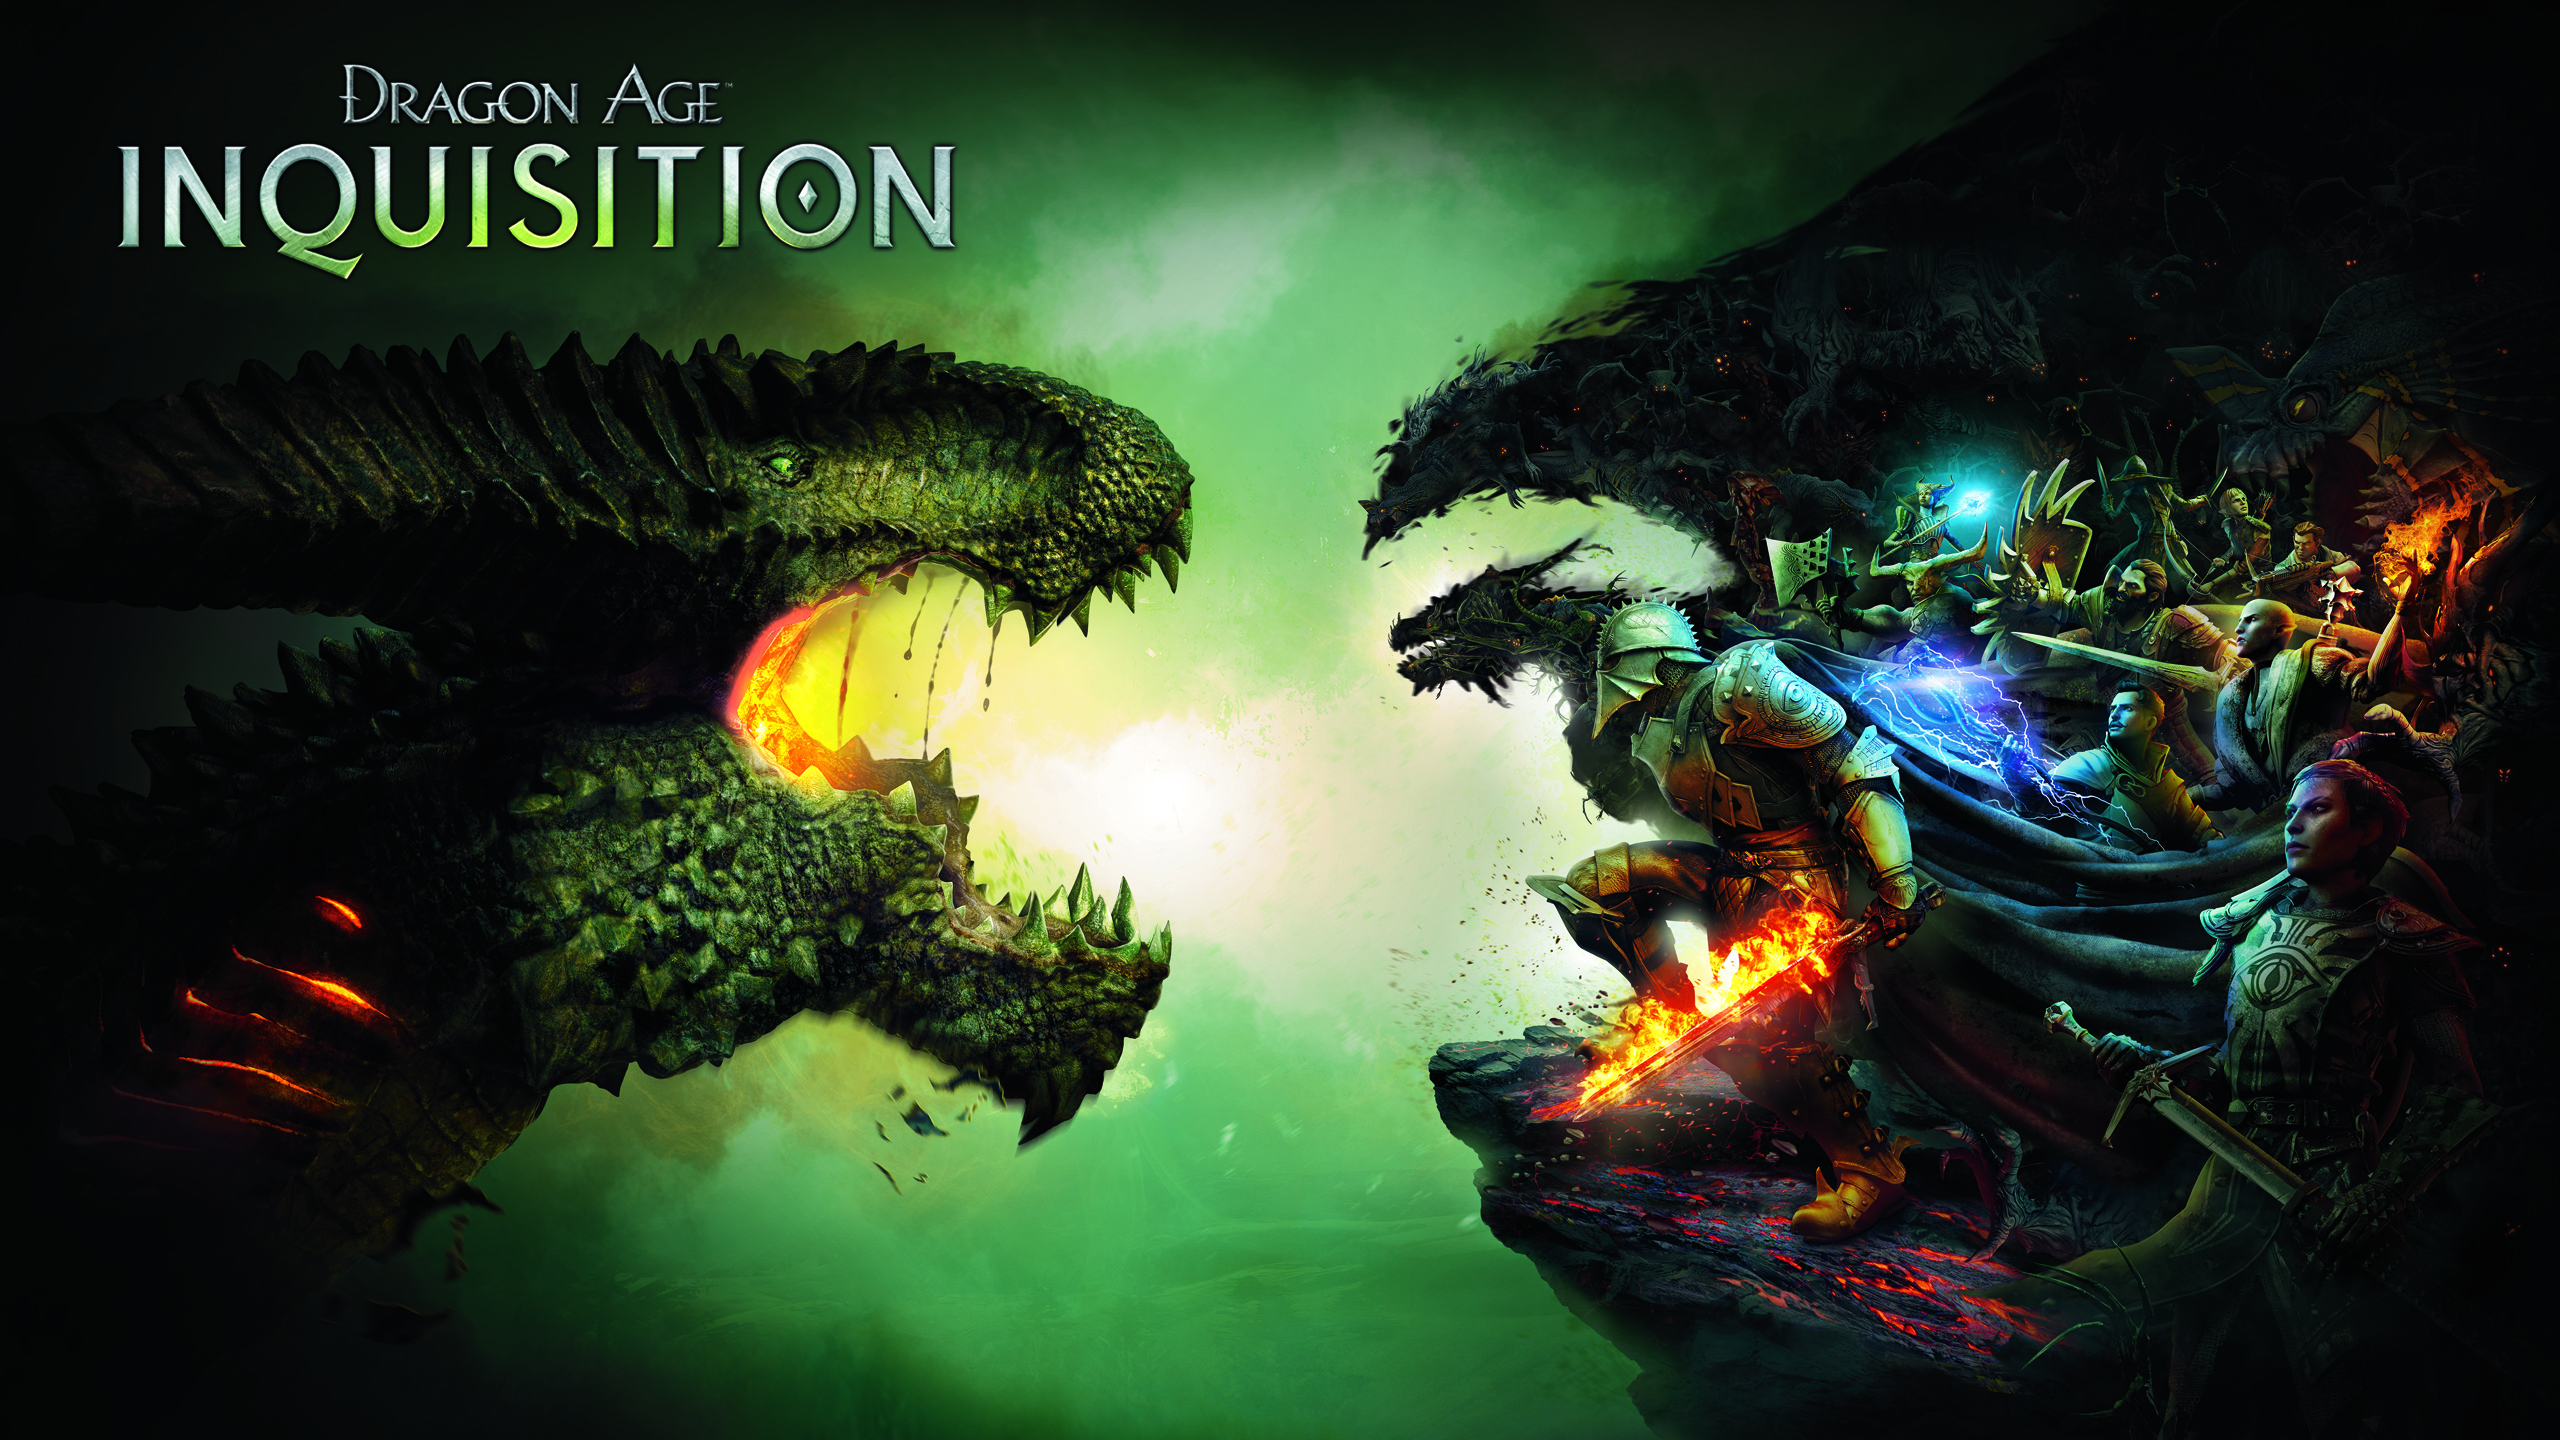 Dragon Age Inquisition Game Wallpapers HD Wallpapers 2560x1440